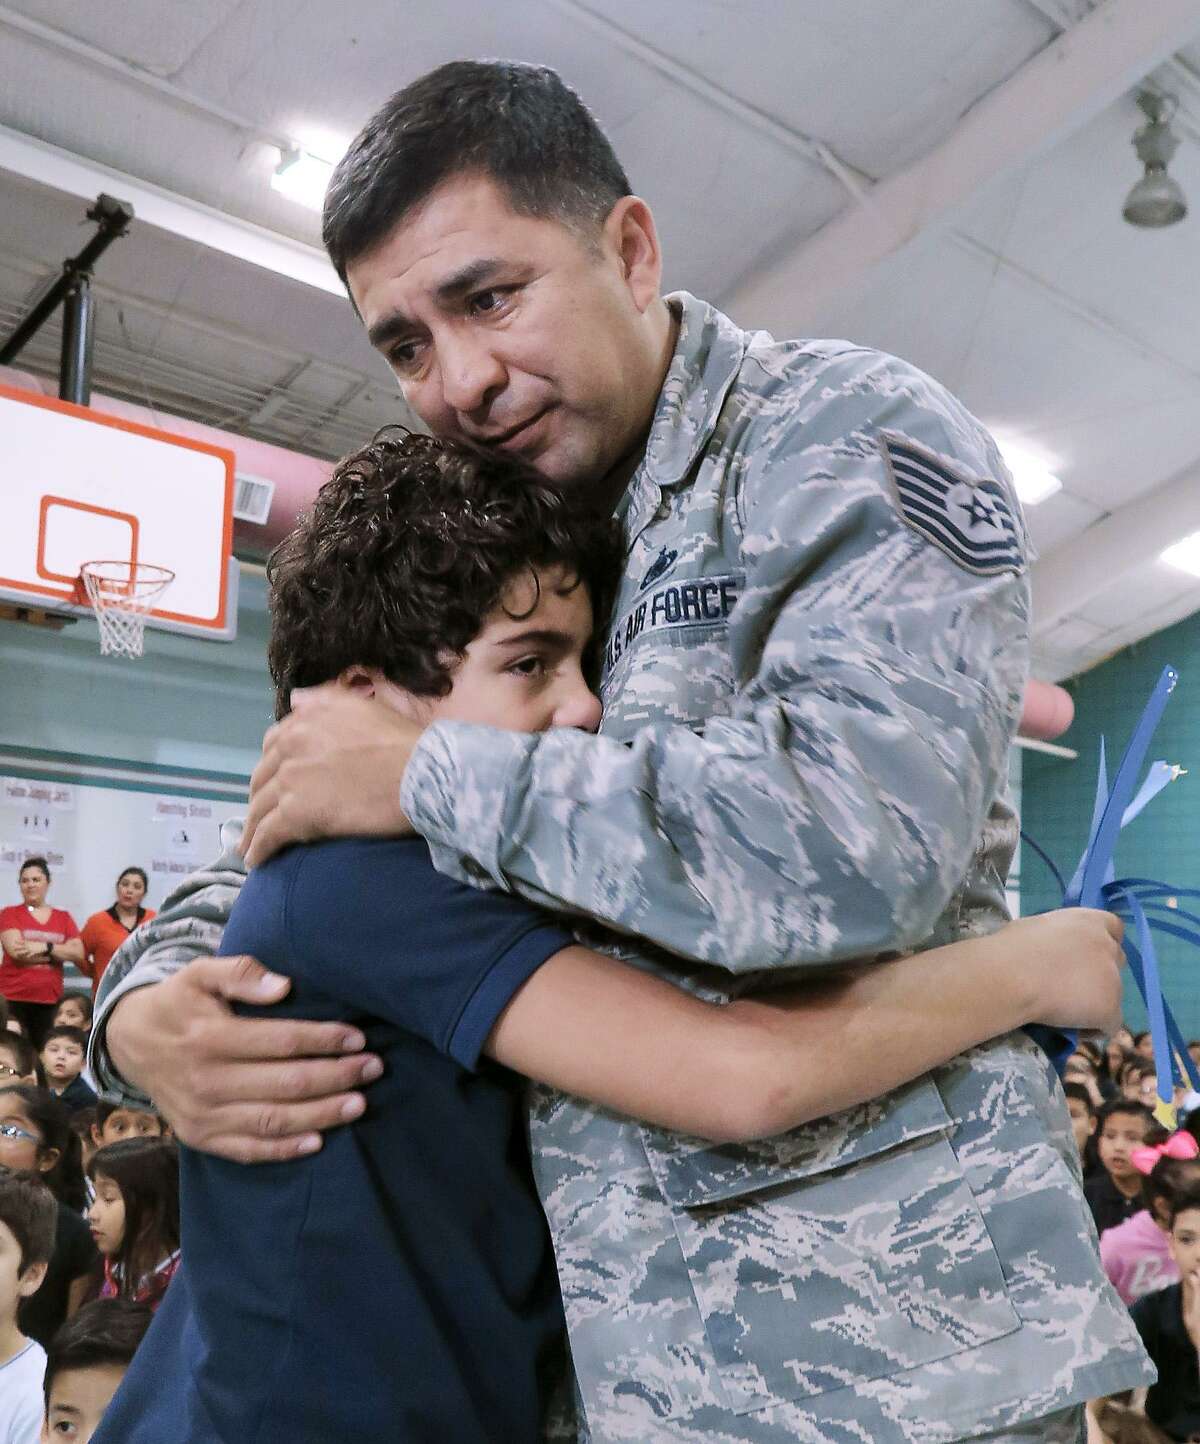 Muller Elementary student Alveyen Alfaro is embraced by his father, Air Force Sgt. Jose Alfaro, on Wednesday, Jan. 25, 2017, at the school gymnasium where Alfaro made a surprise entrance for his son after a seven-month military deployment.